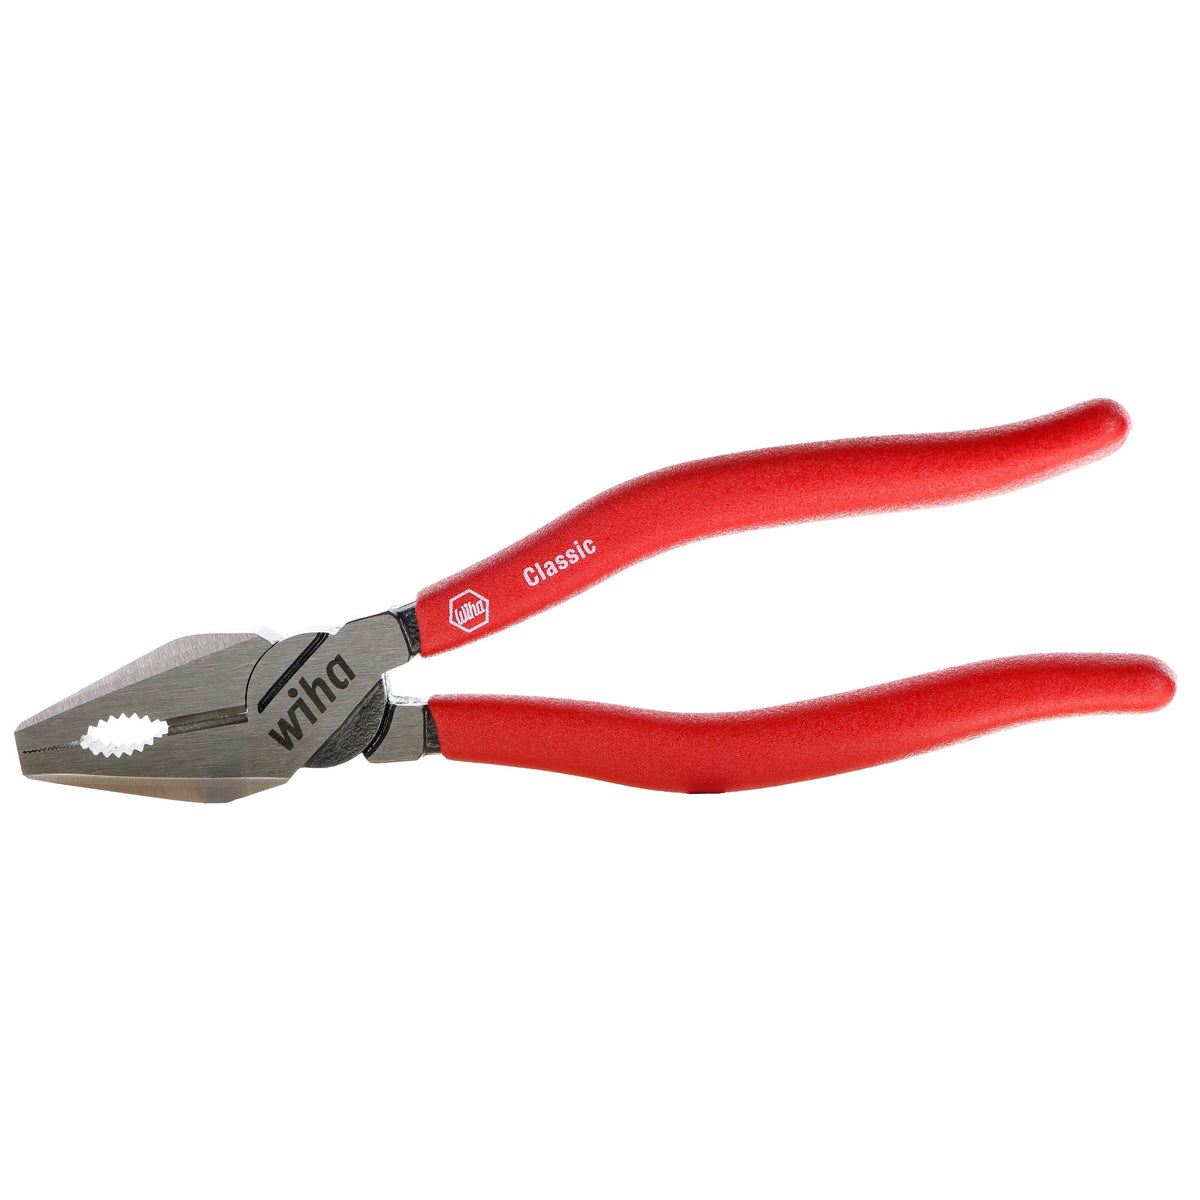 302122 - Electrical Service Pliers